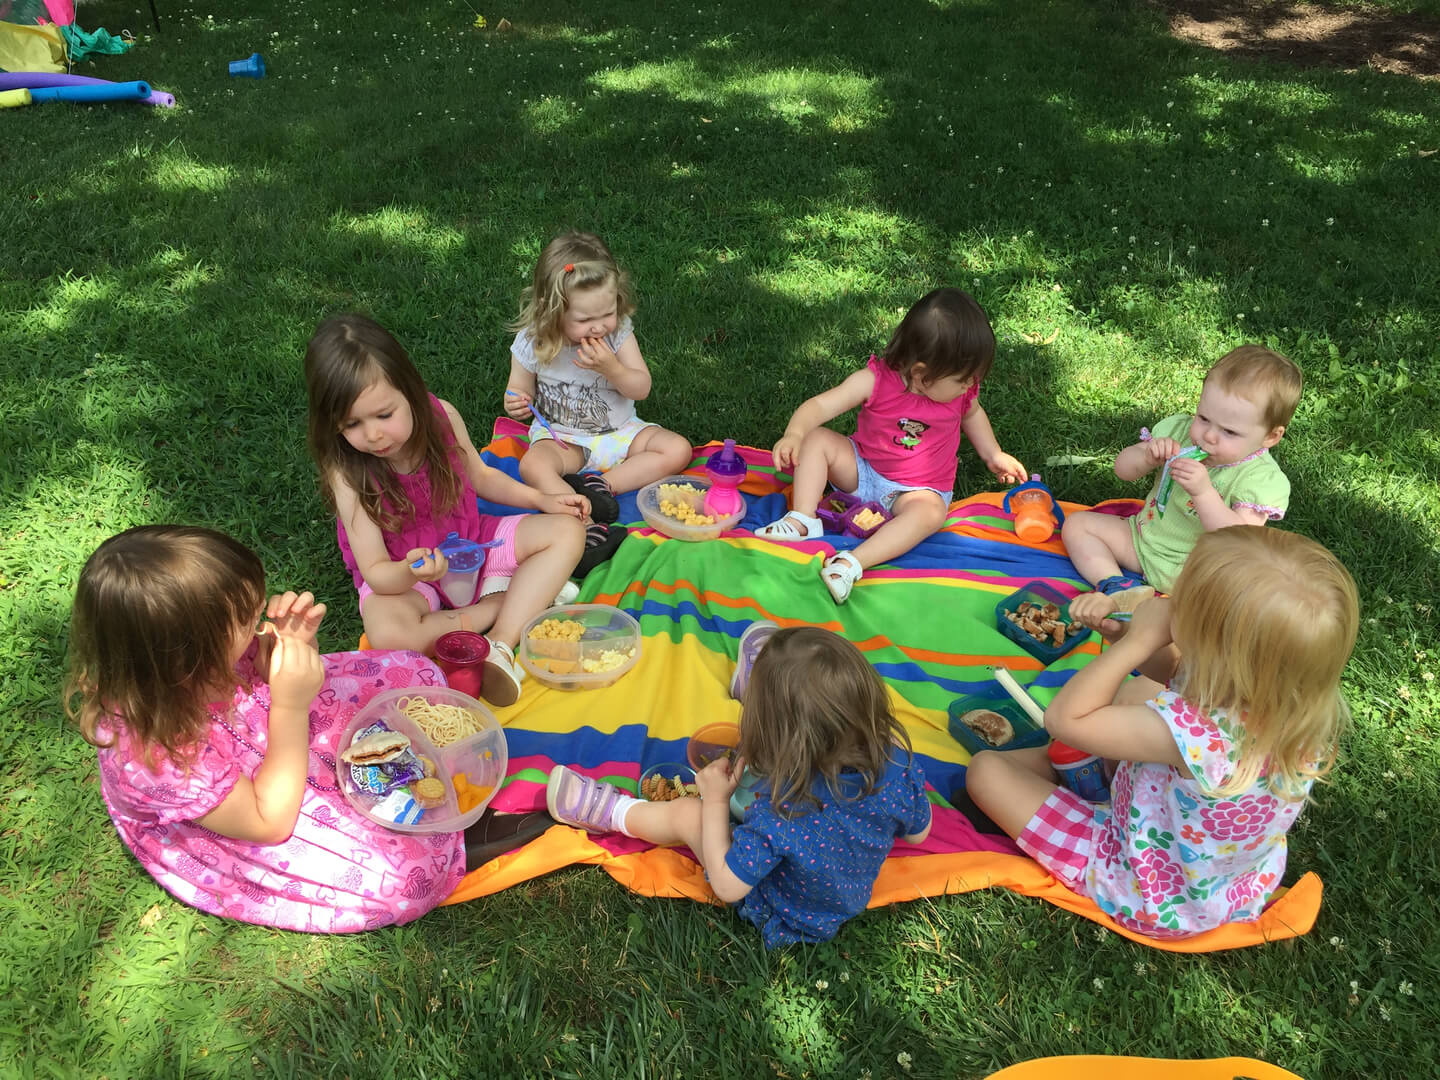 Children having a picnic on the lawn